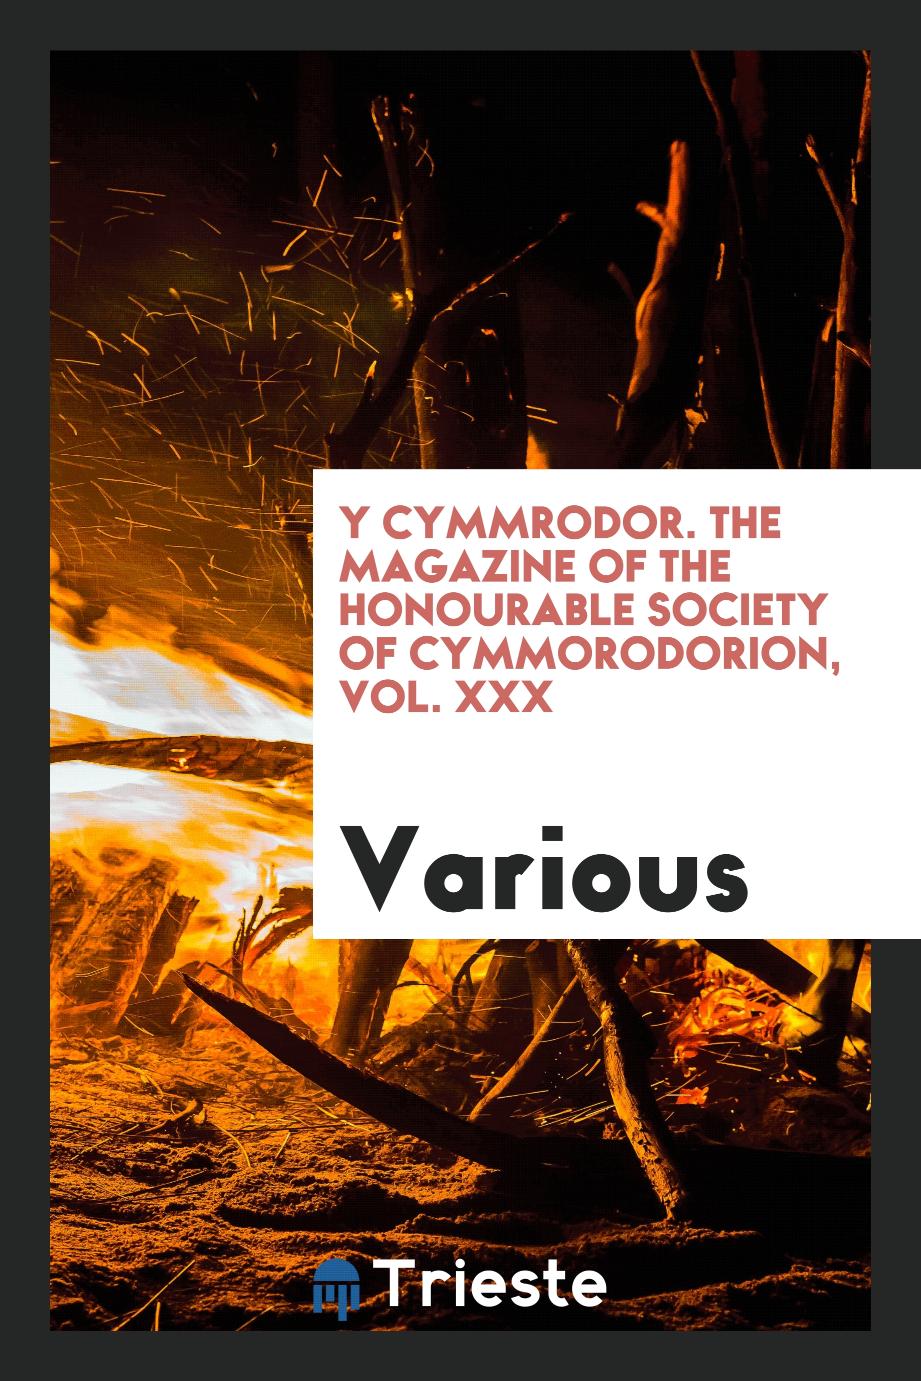 Y Cymmrodor. the magazine of the honourable society of cymmorodorion, Vol. XXX